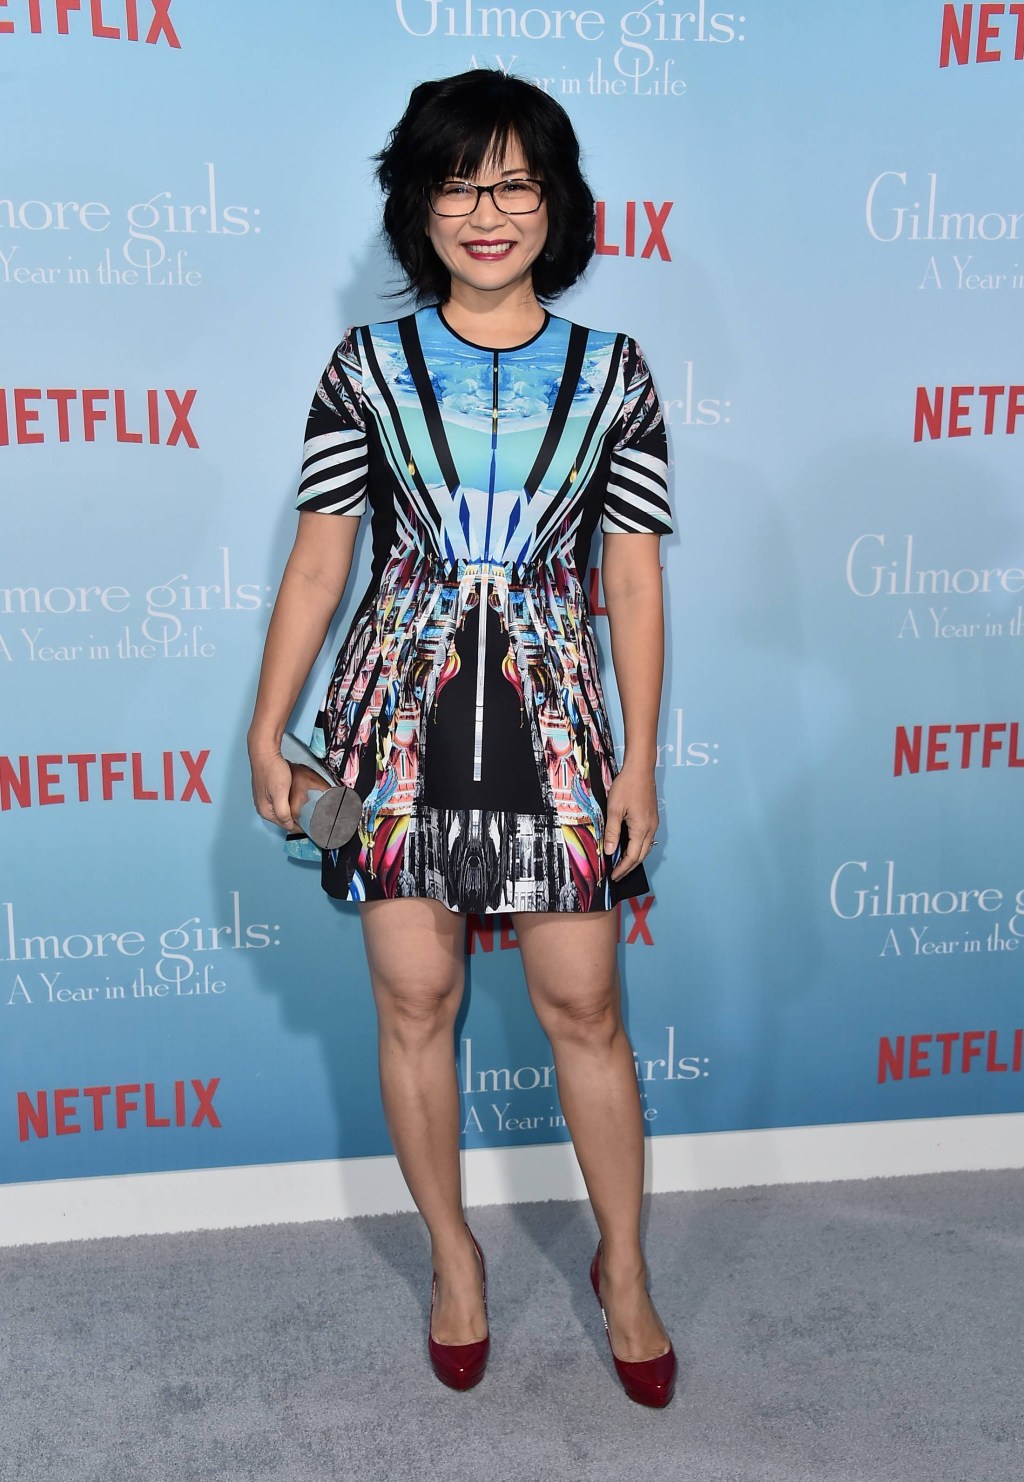 LOS ANGELES, CA - NOVEMBER 18: Actress Keiko Agena attends the premiere of Netflix's "Gilmore Girls: A Year In The Life" at the Regency Bruin Theatre on November 18, 2016 in Los Angeles, California. (Photo by Alberto E. Rodriguez/Getty Images)